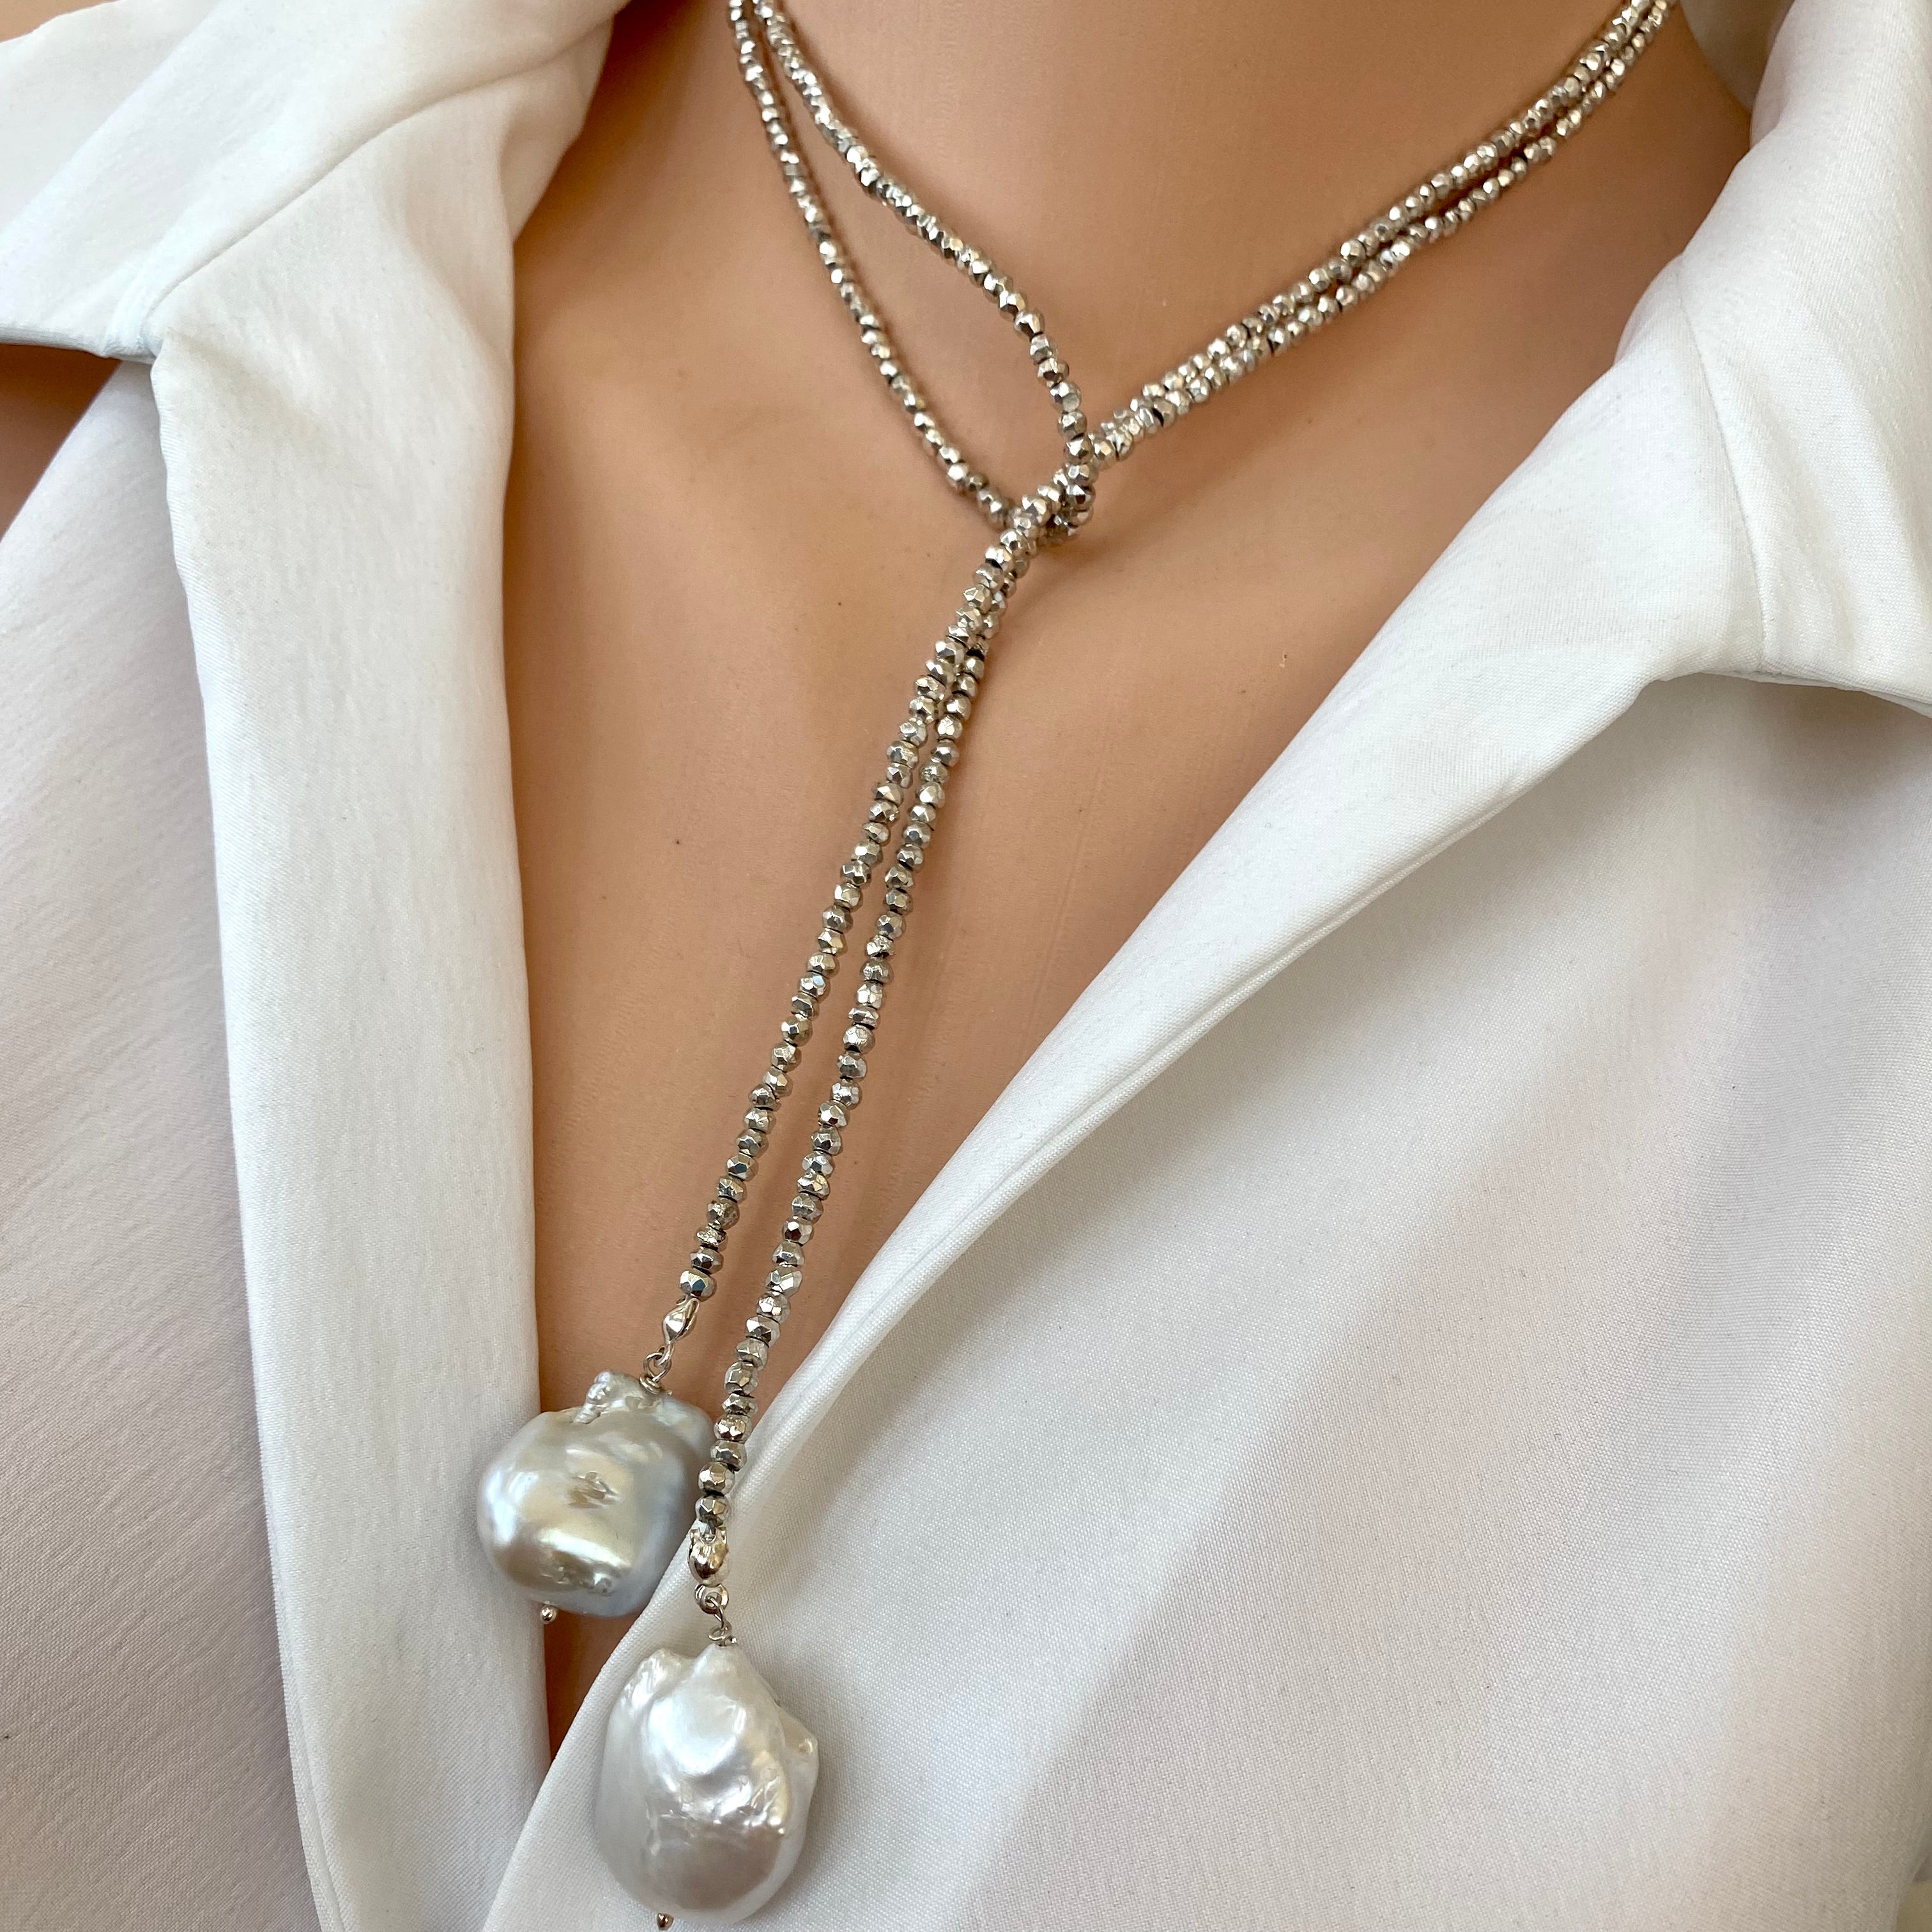 Baroque Pearl Necklace, Mismatched Big Pearl Beads Necklace